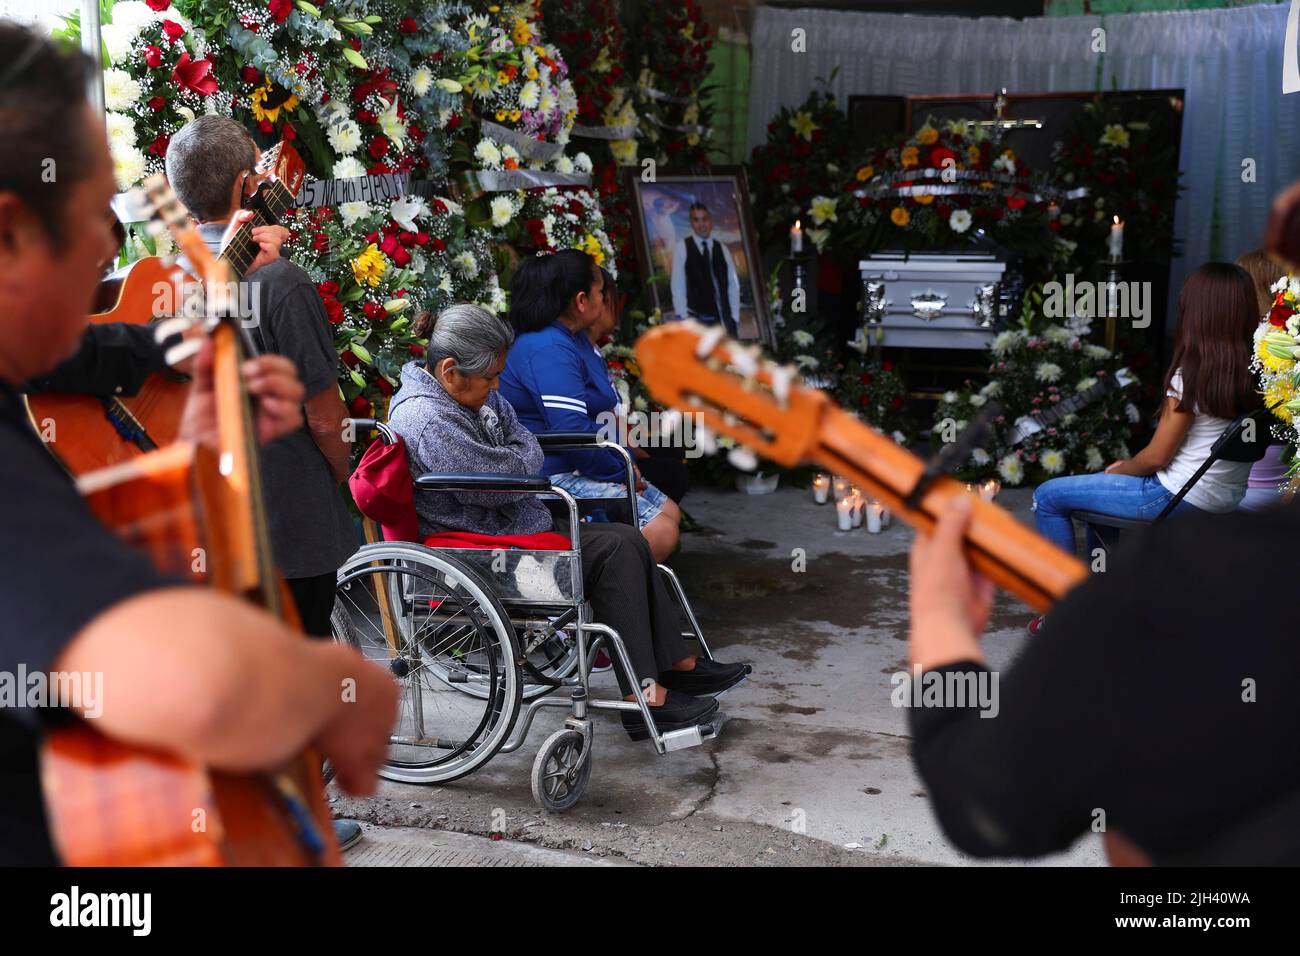 Relatives and friends of late migrant Jose Lopez, 34, attend his wake after being repatriated from San Antonio, Texas, U.S., at his family's home in Celaya, in Guanajuato state, Mexico July 14, 2022. REUTERS/Edgard Garrido Stock Photo